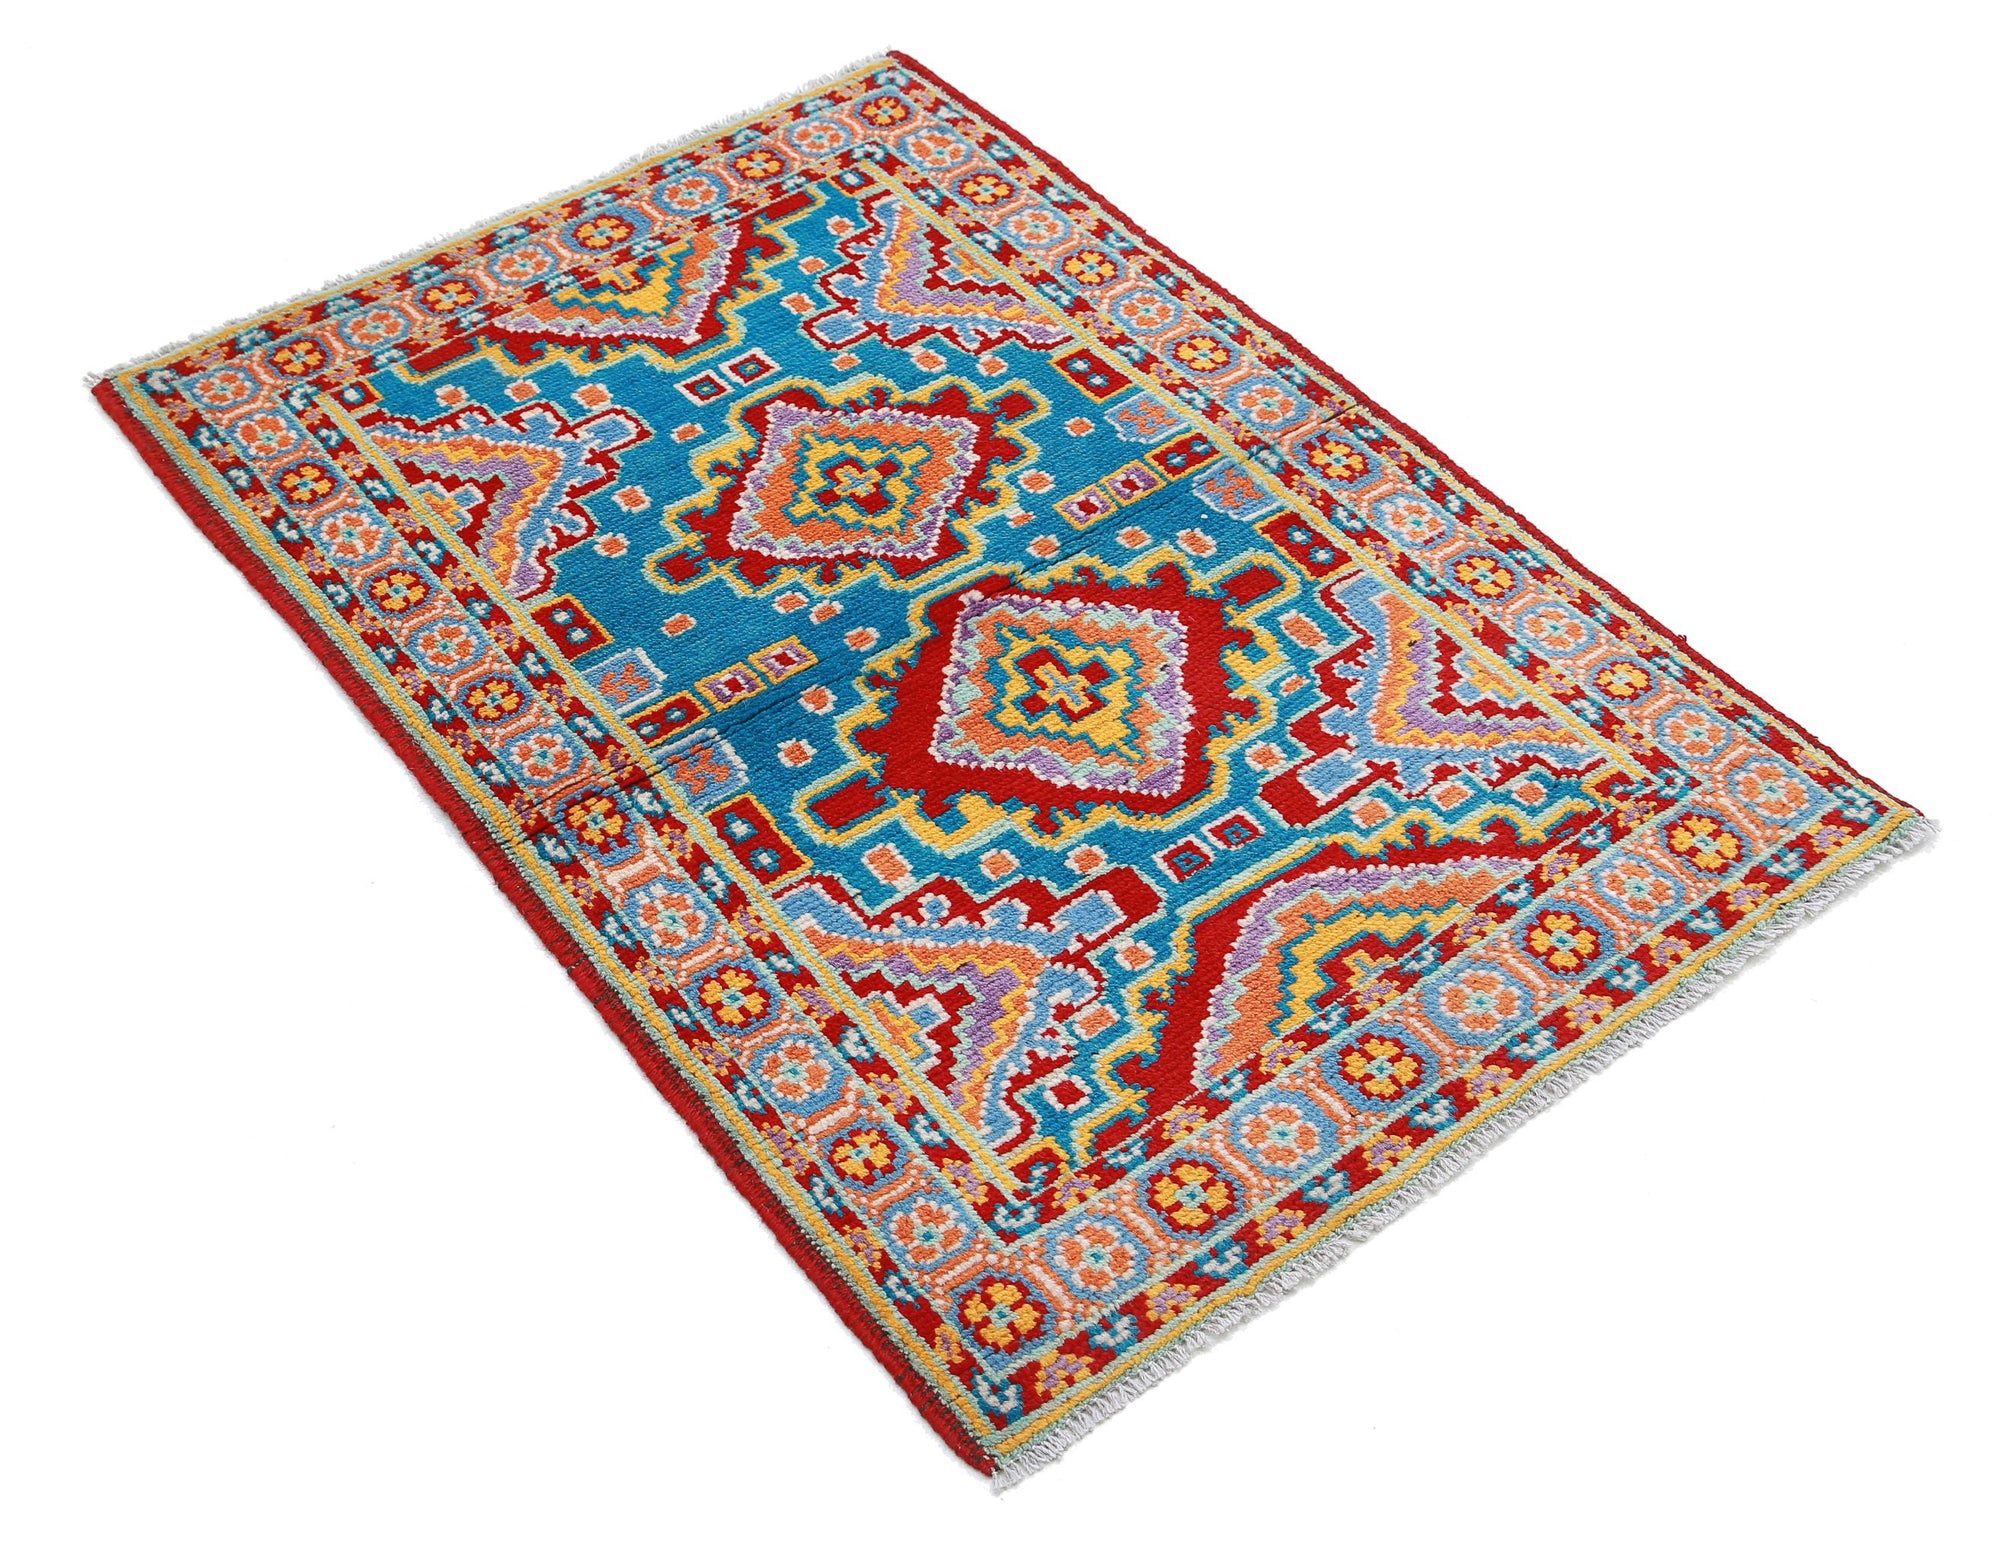 Revival-hand-knotted-qarghani-wool-rug-5014008-1.jpg